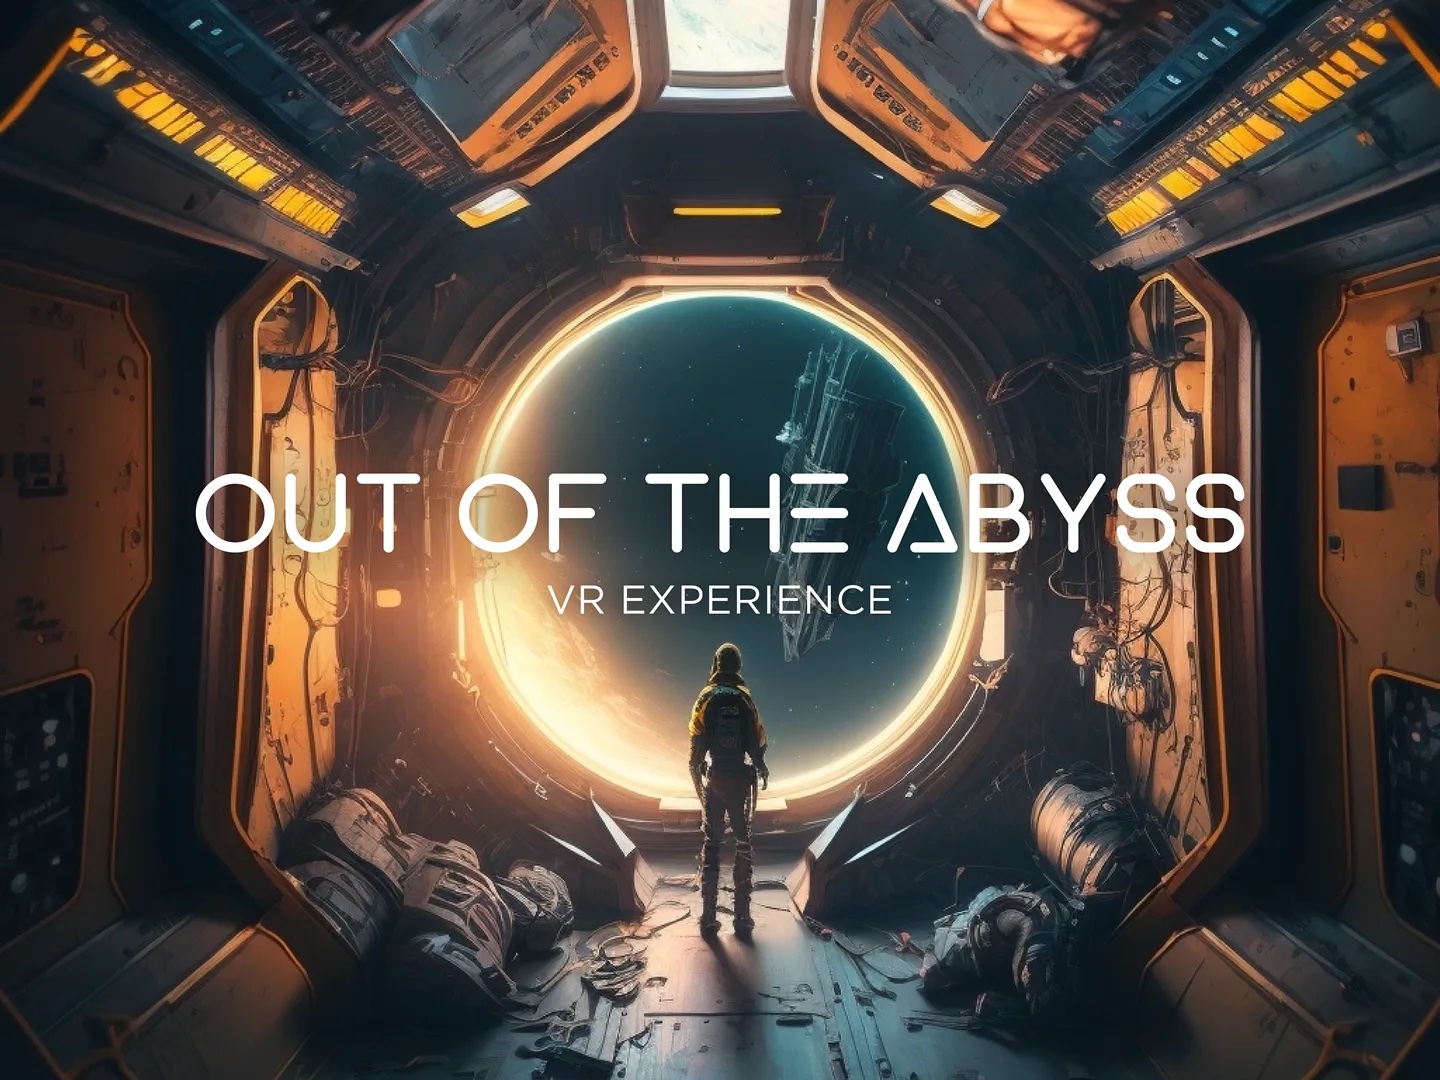 Out of the Abyss game showing astronaught standing at a giant circular glass window looking out into space.